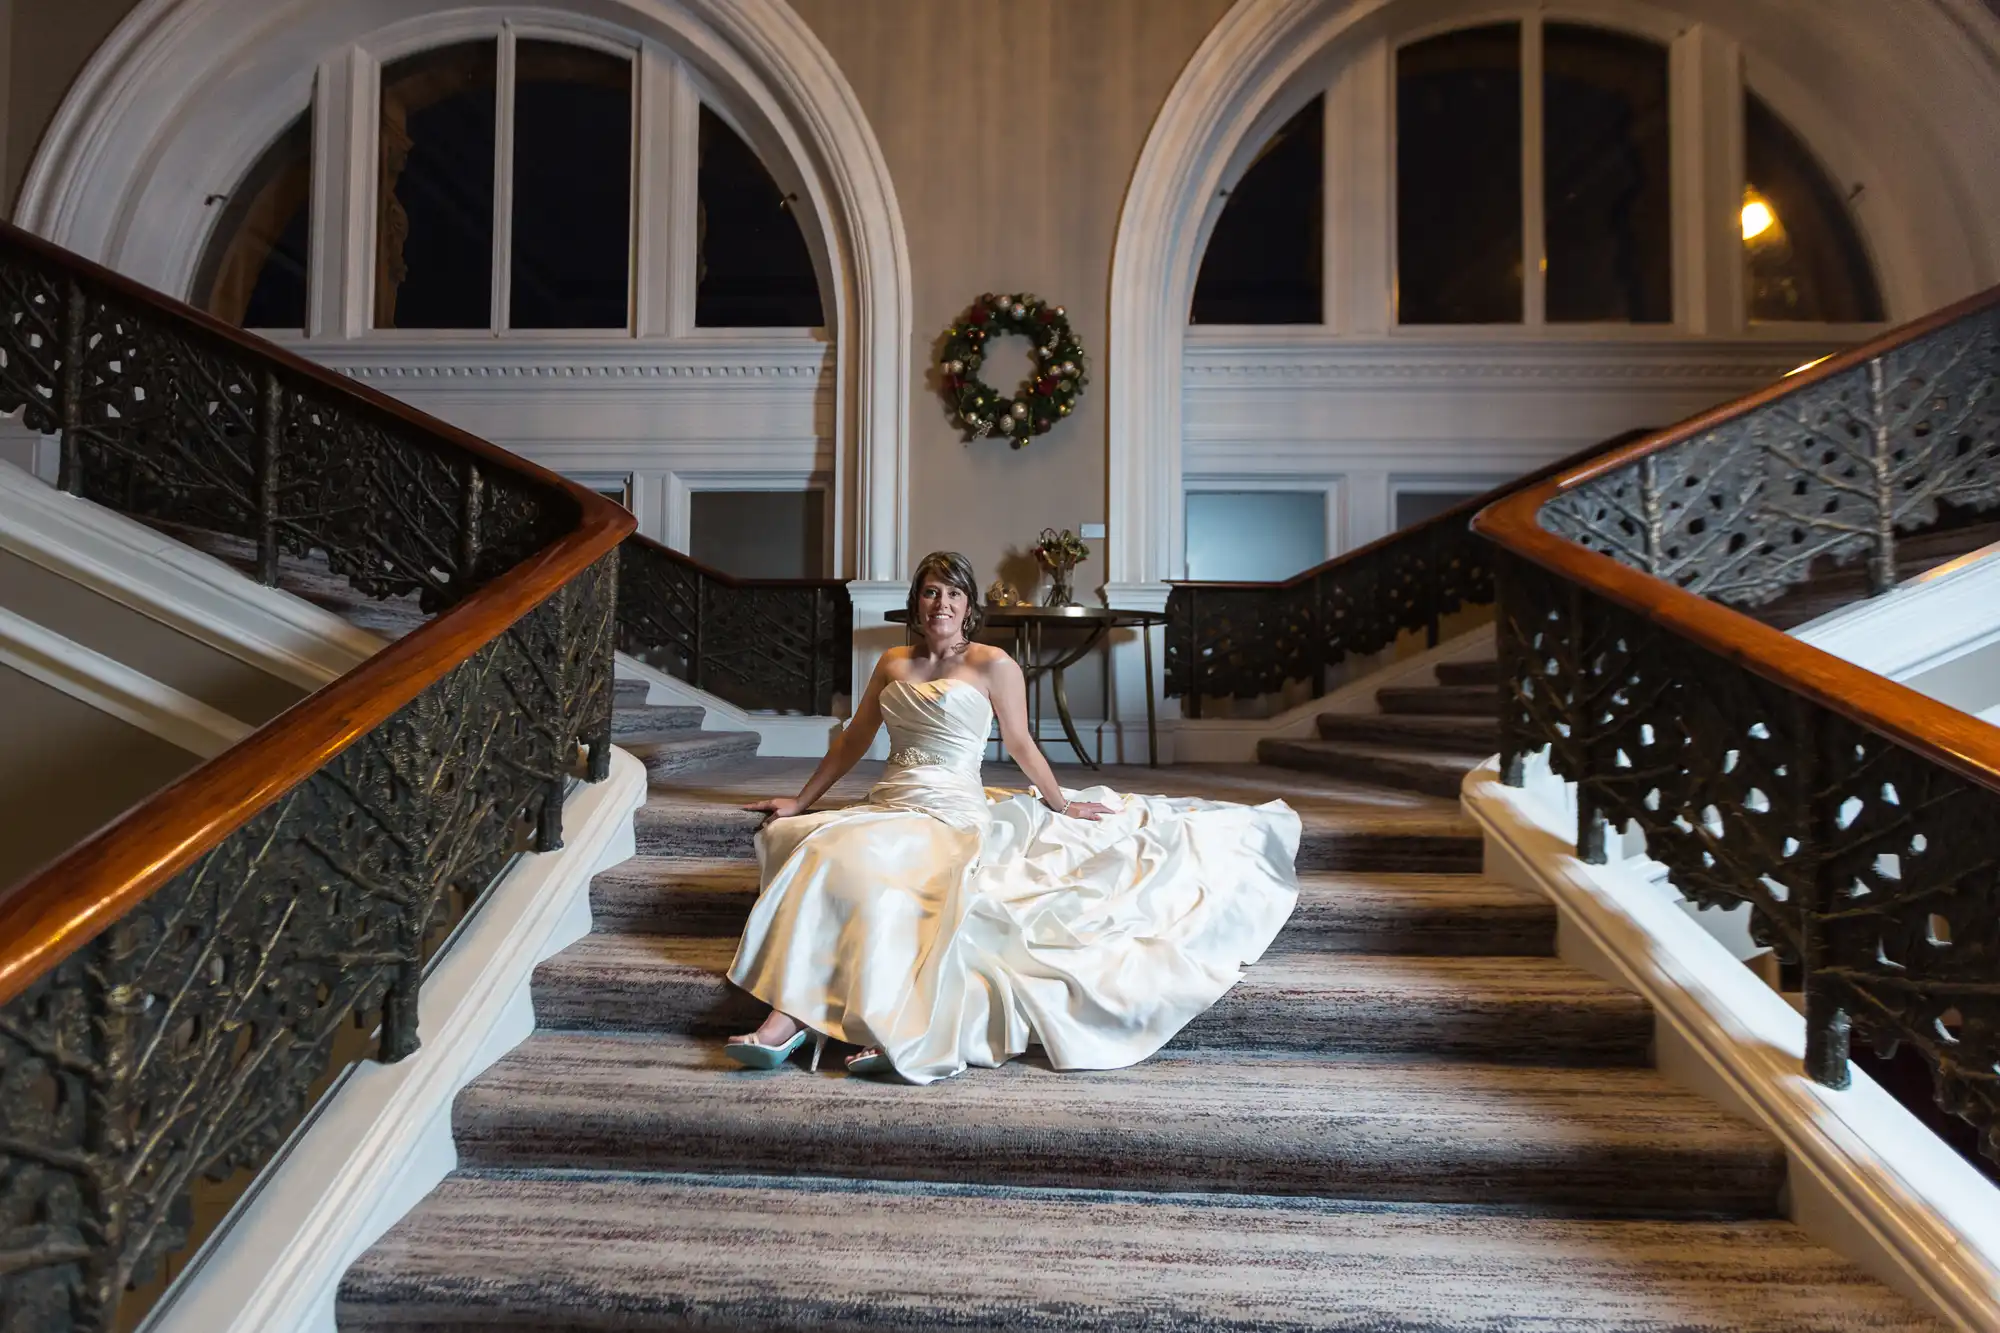 A woman in a white dress sits on a carpeted staircase between ornate metal railings, with large windows and a wreath in the background.